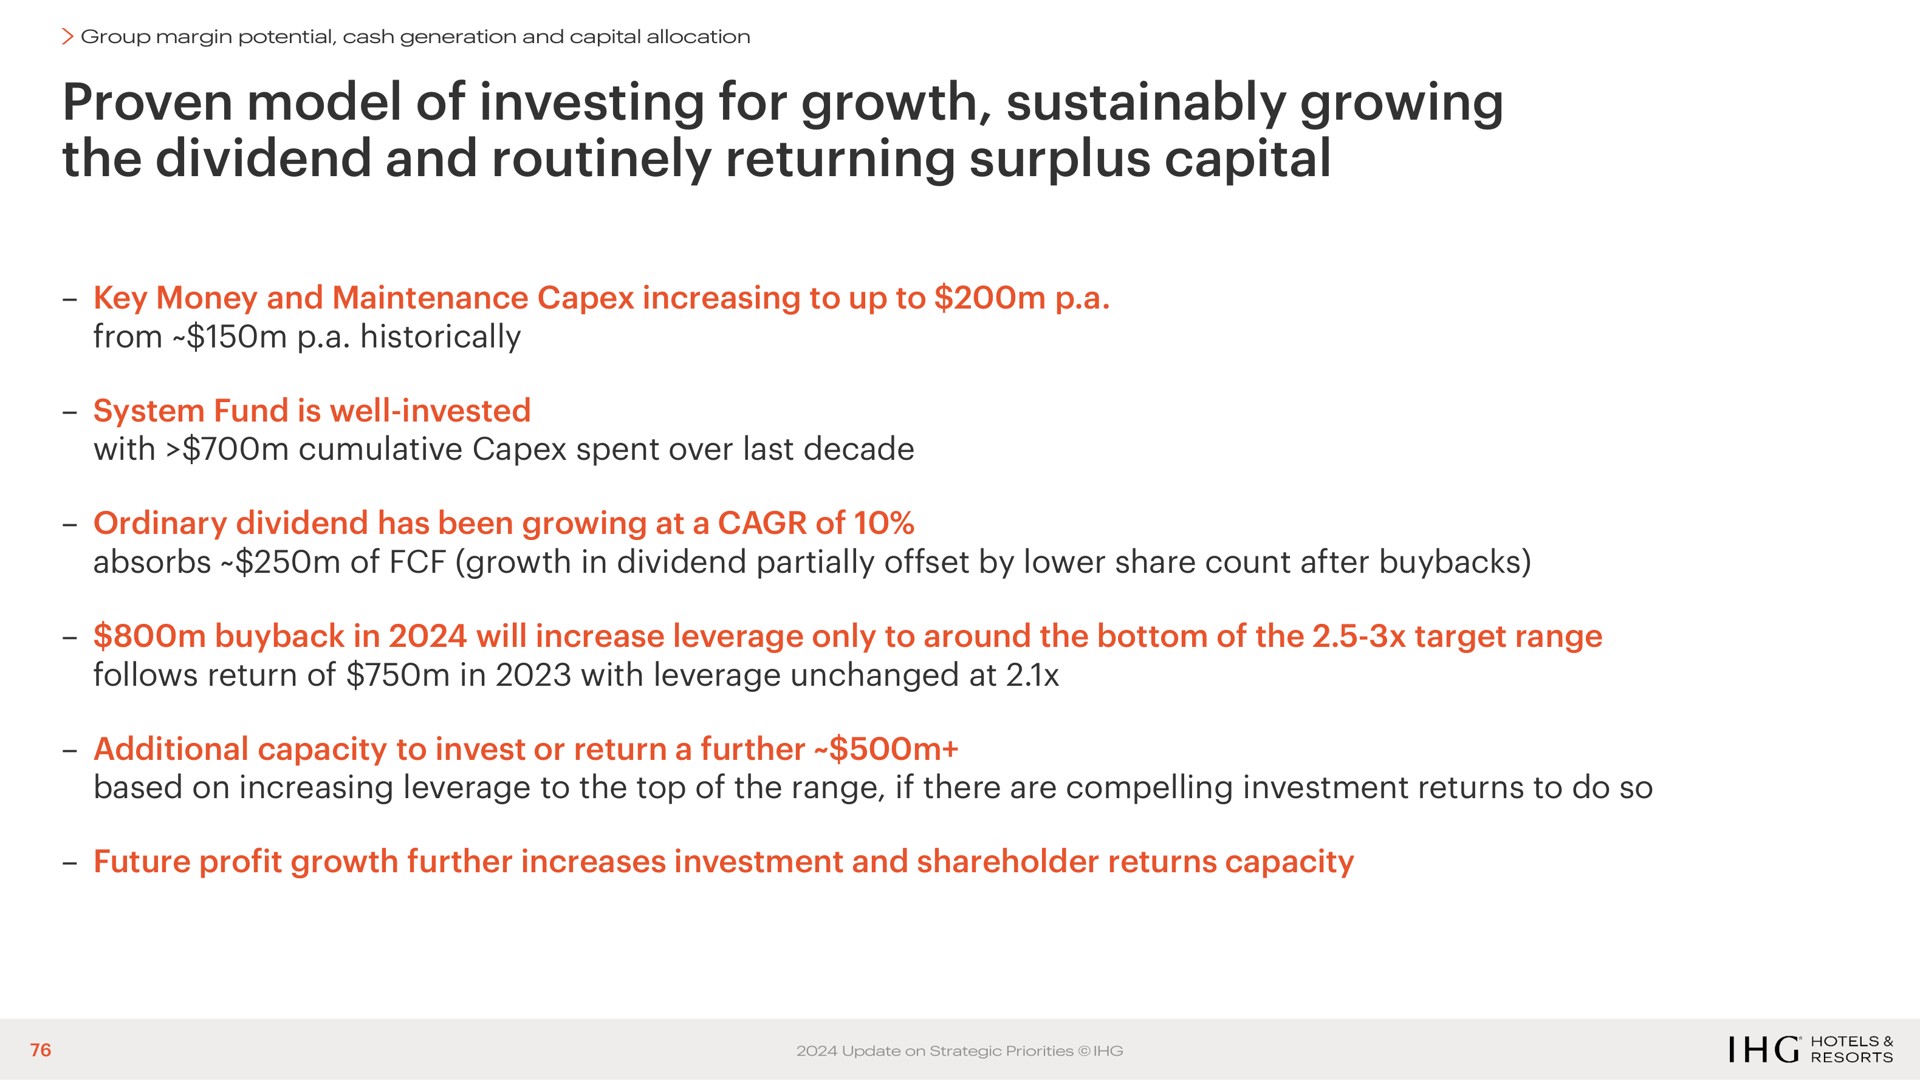 proven model of investing for growth growing the dividend and routinely returning surplus capital | IHG Hotels